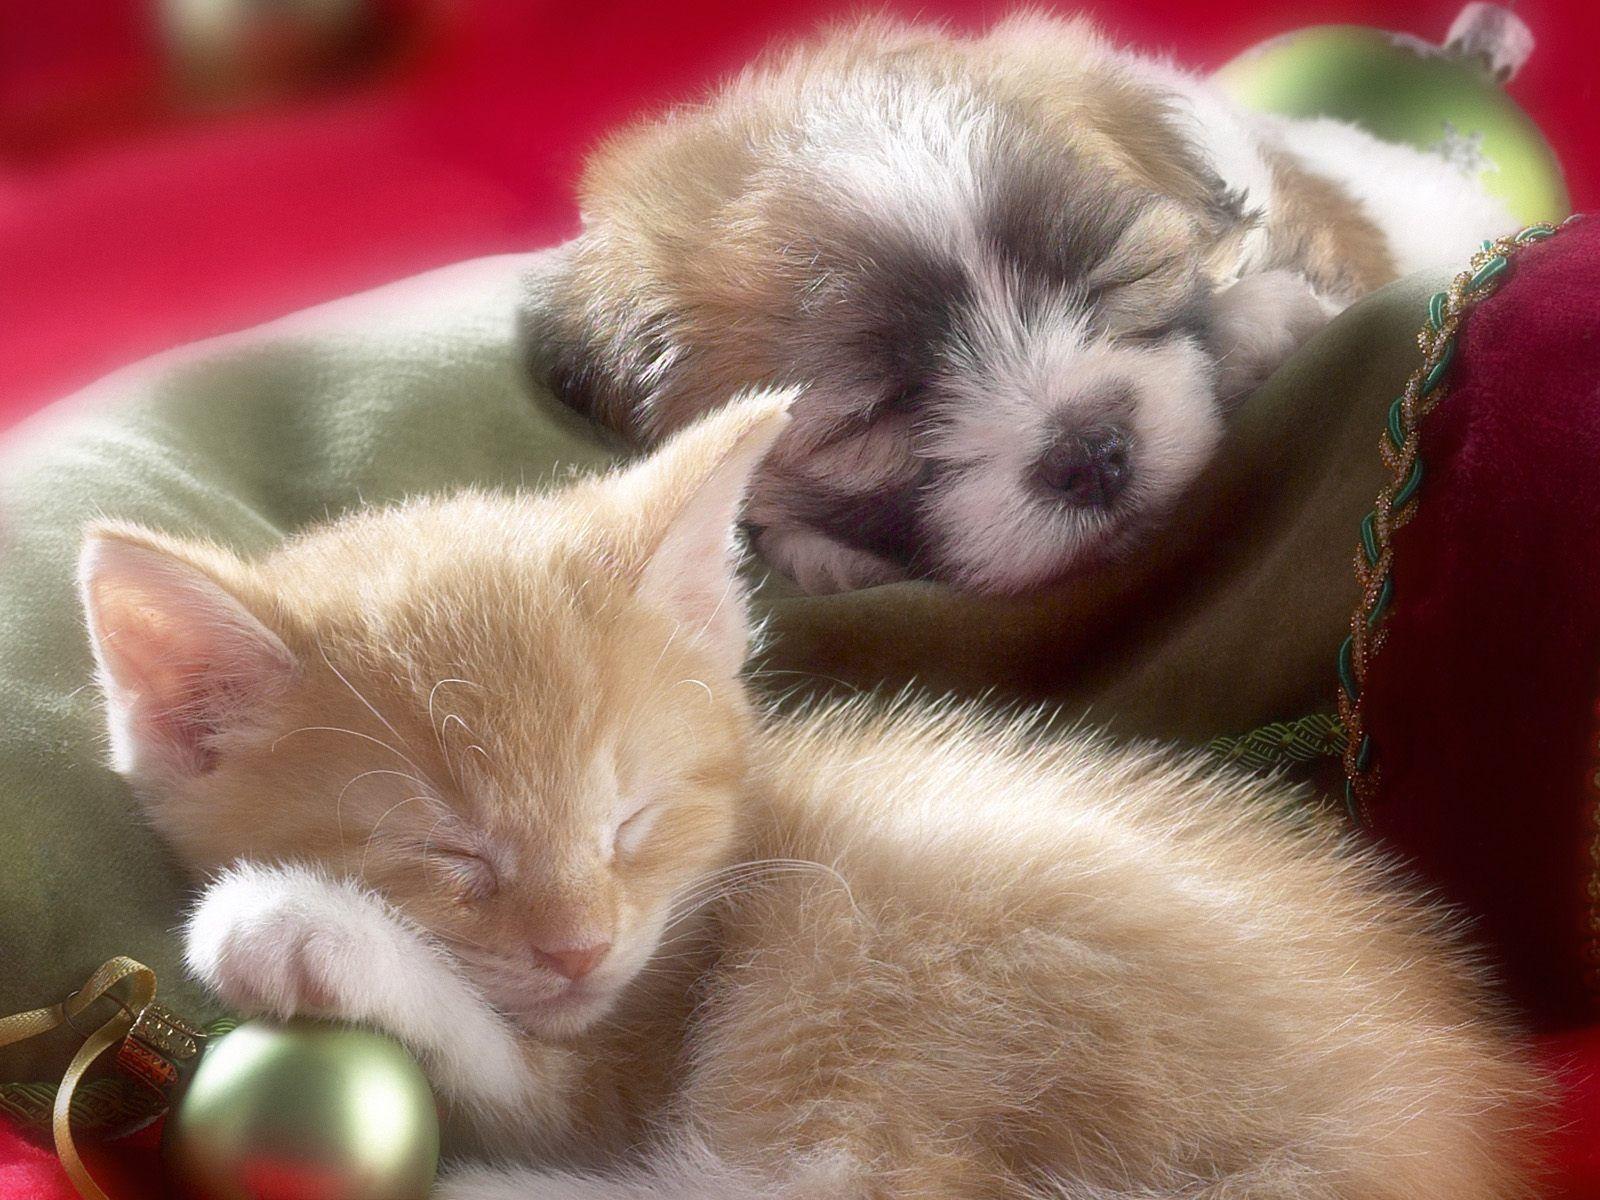 Puppies And Kittens Wallpaper HD Image Gallery